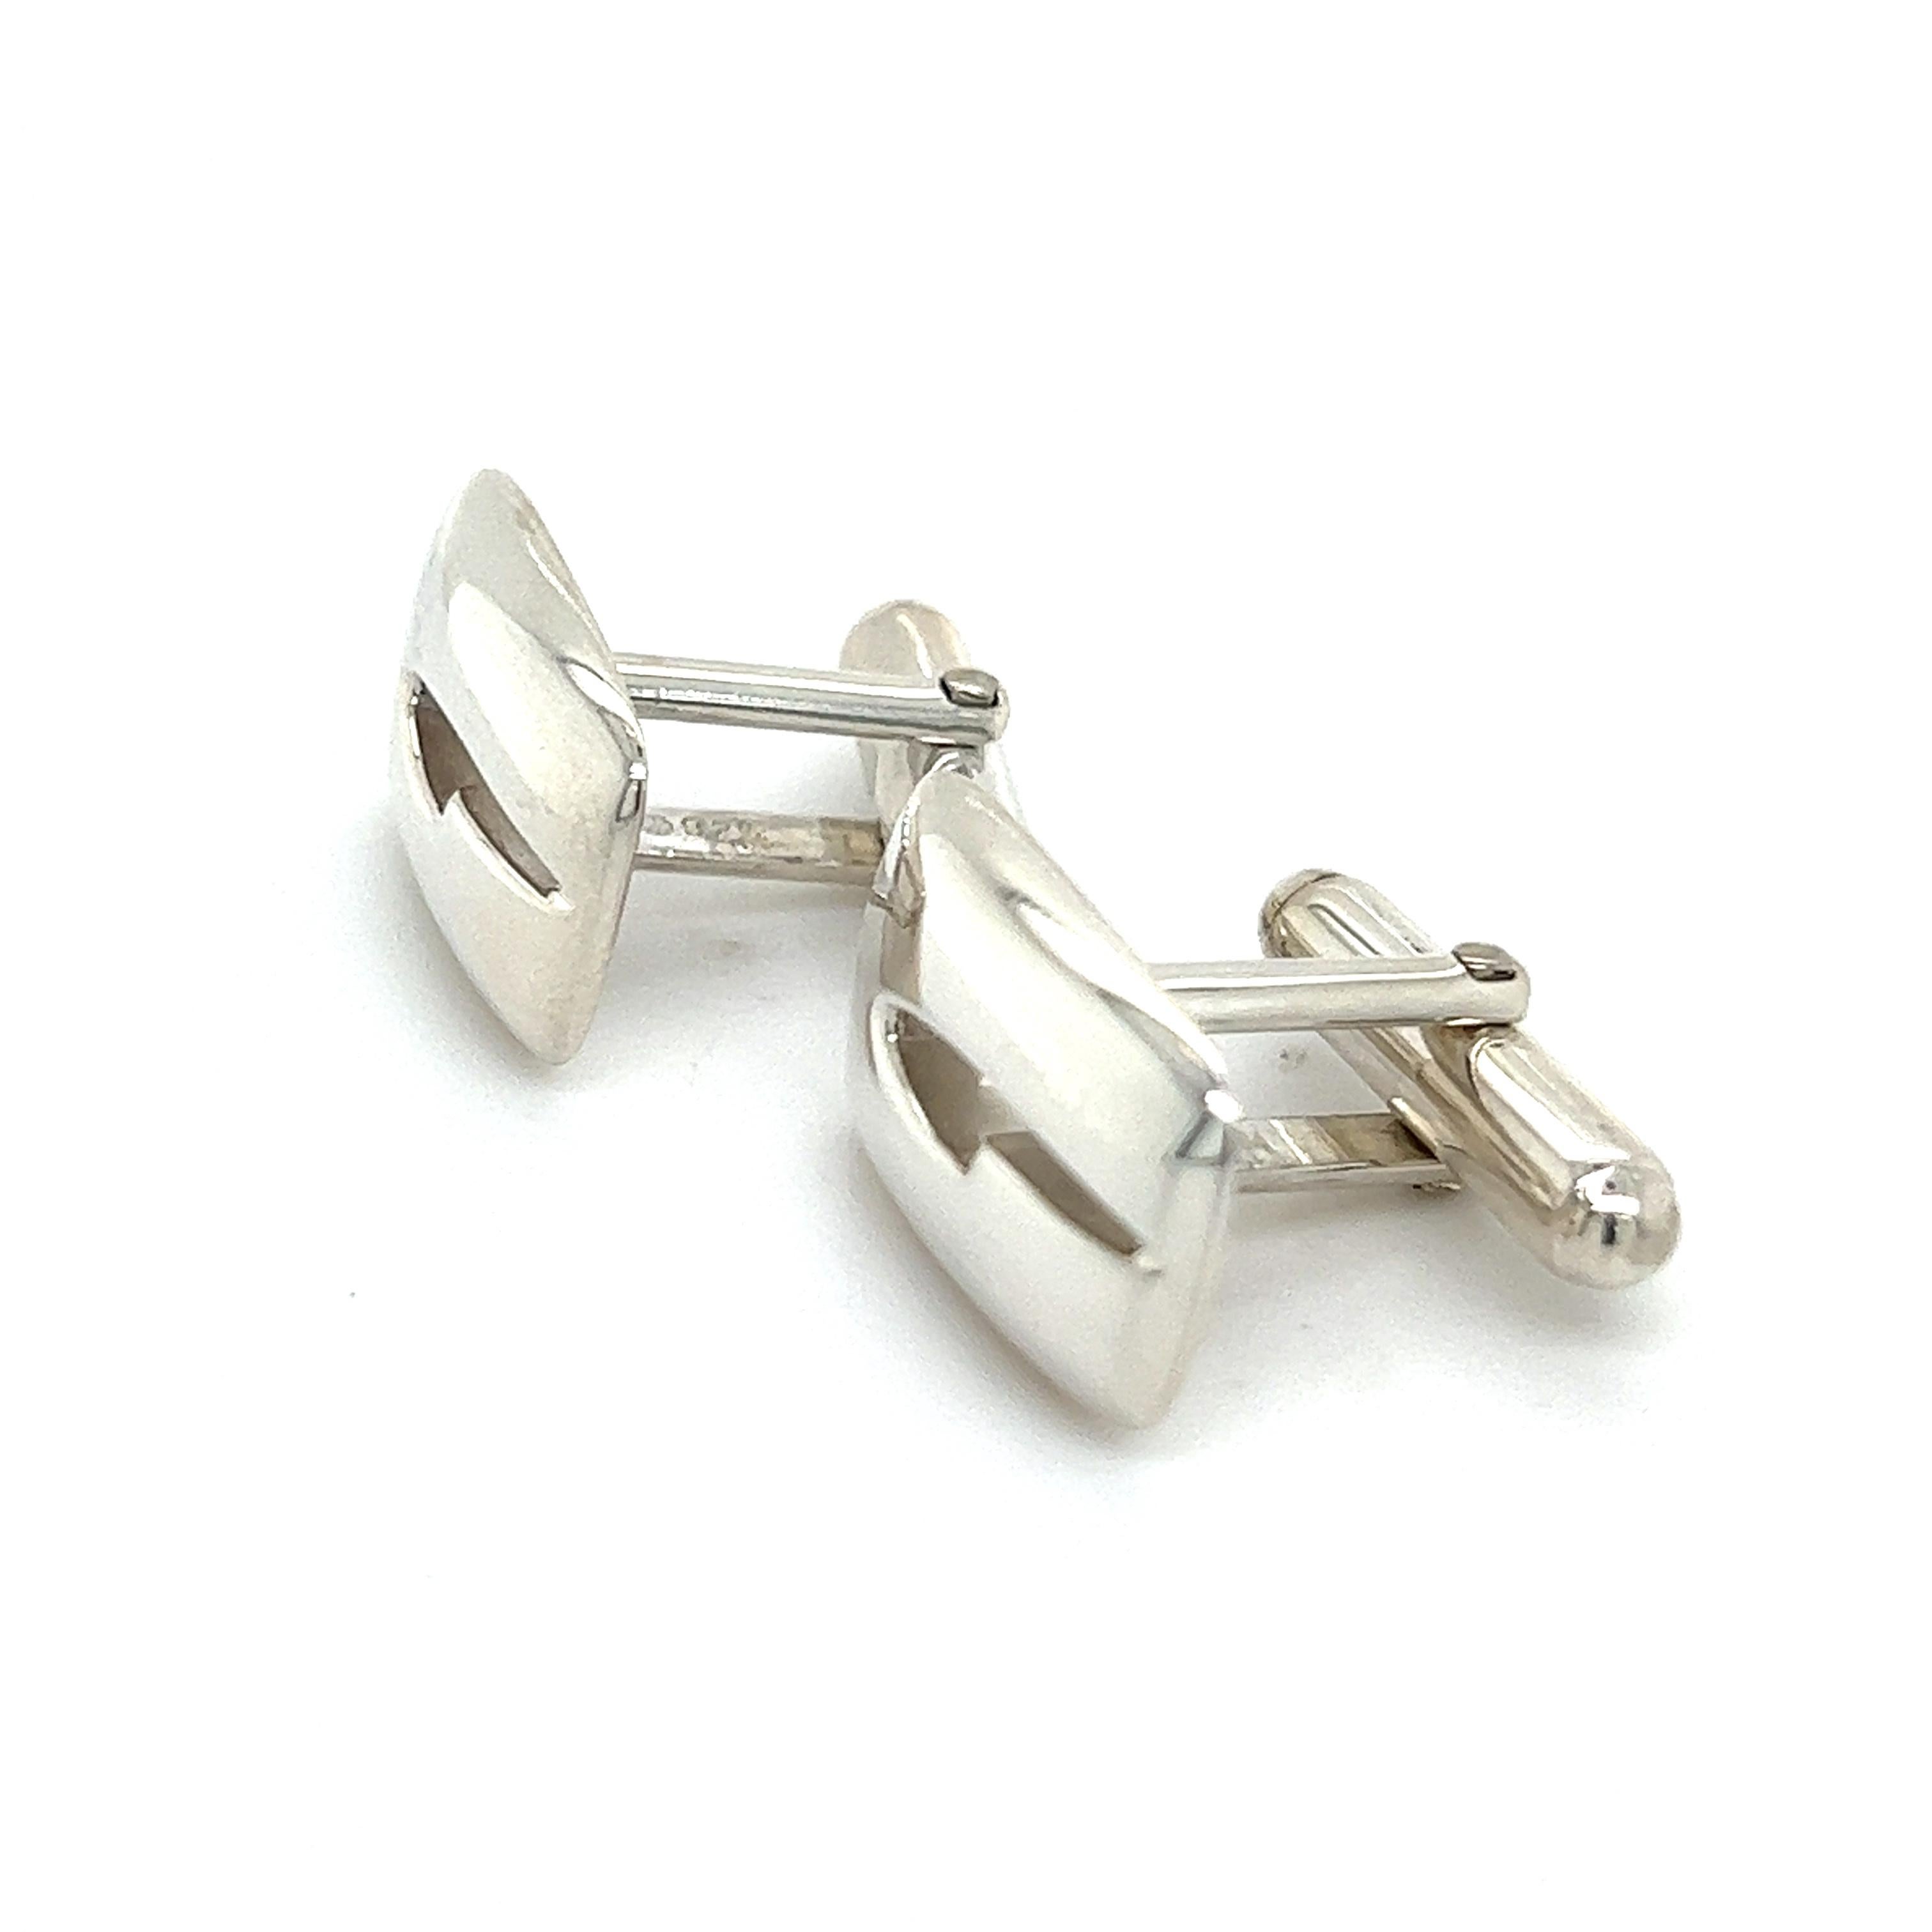 Authentic Gucci Estate Mens Cufflinks Sterling Silver G21

These elegant Authentic Gucci cufflinks are made of sterling silver and have a weight of 14 grams.

TRUSTED SELLER SINCE 2002

PLEASE SEE OUR HUNDREDS OF POSITIVE FEEDBACKS FROM OUR